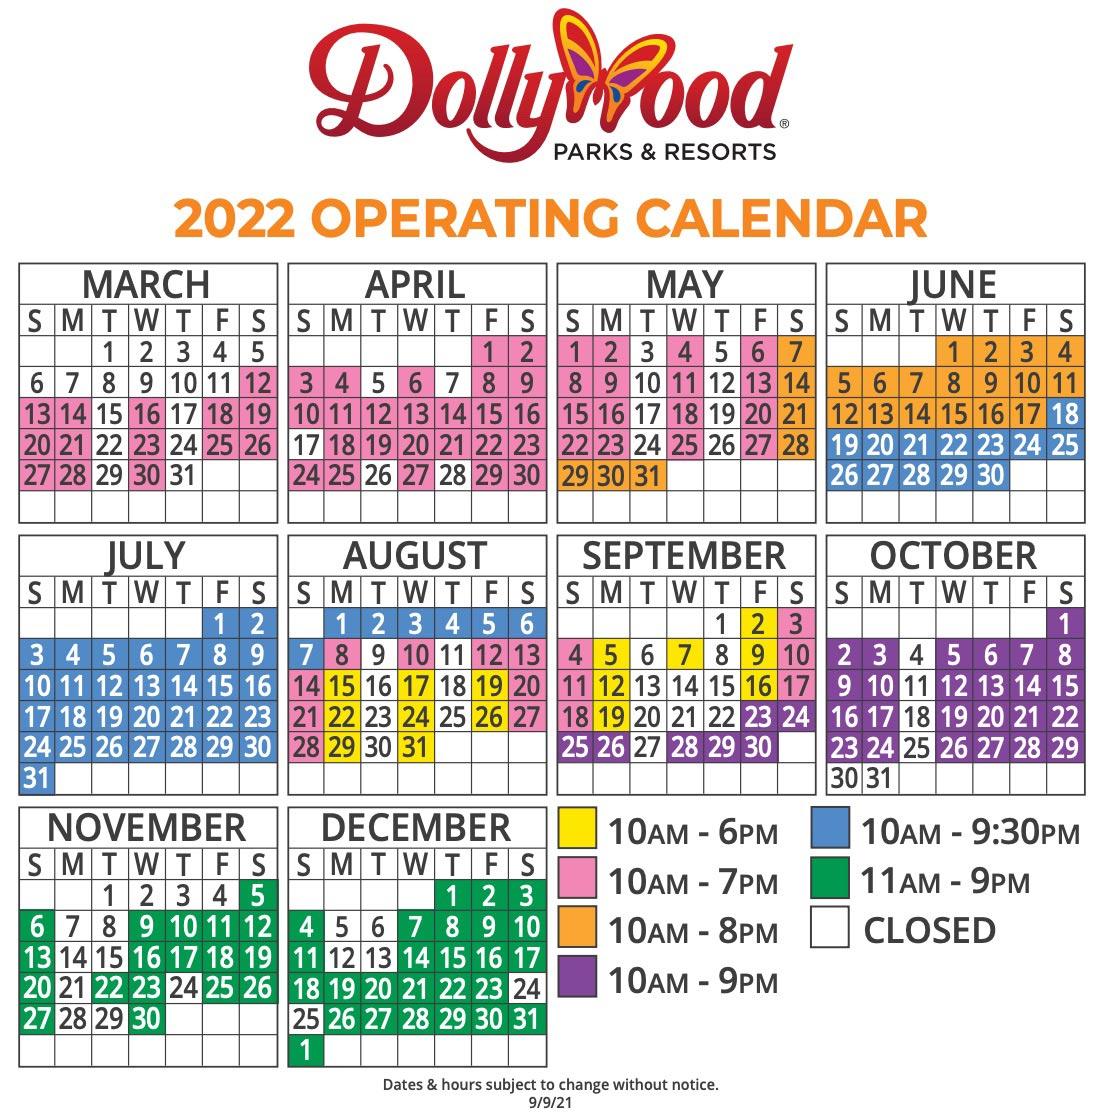 Dollywood Schedule 2022 and Guide | Dates, Hours, Rides, Shows, etc